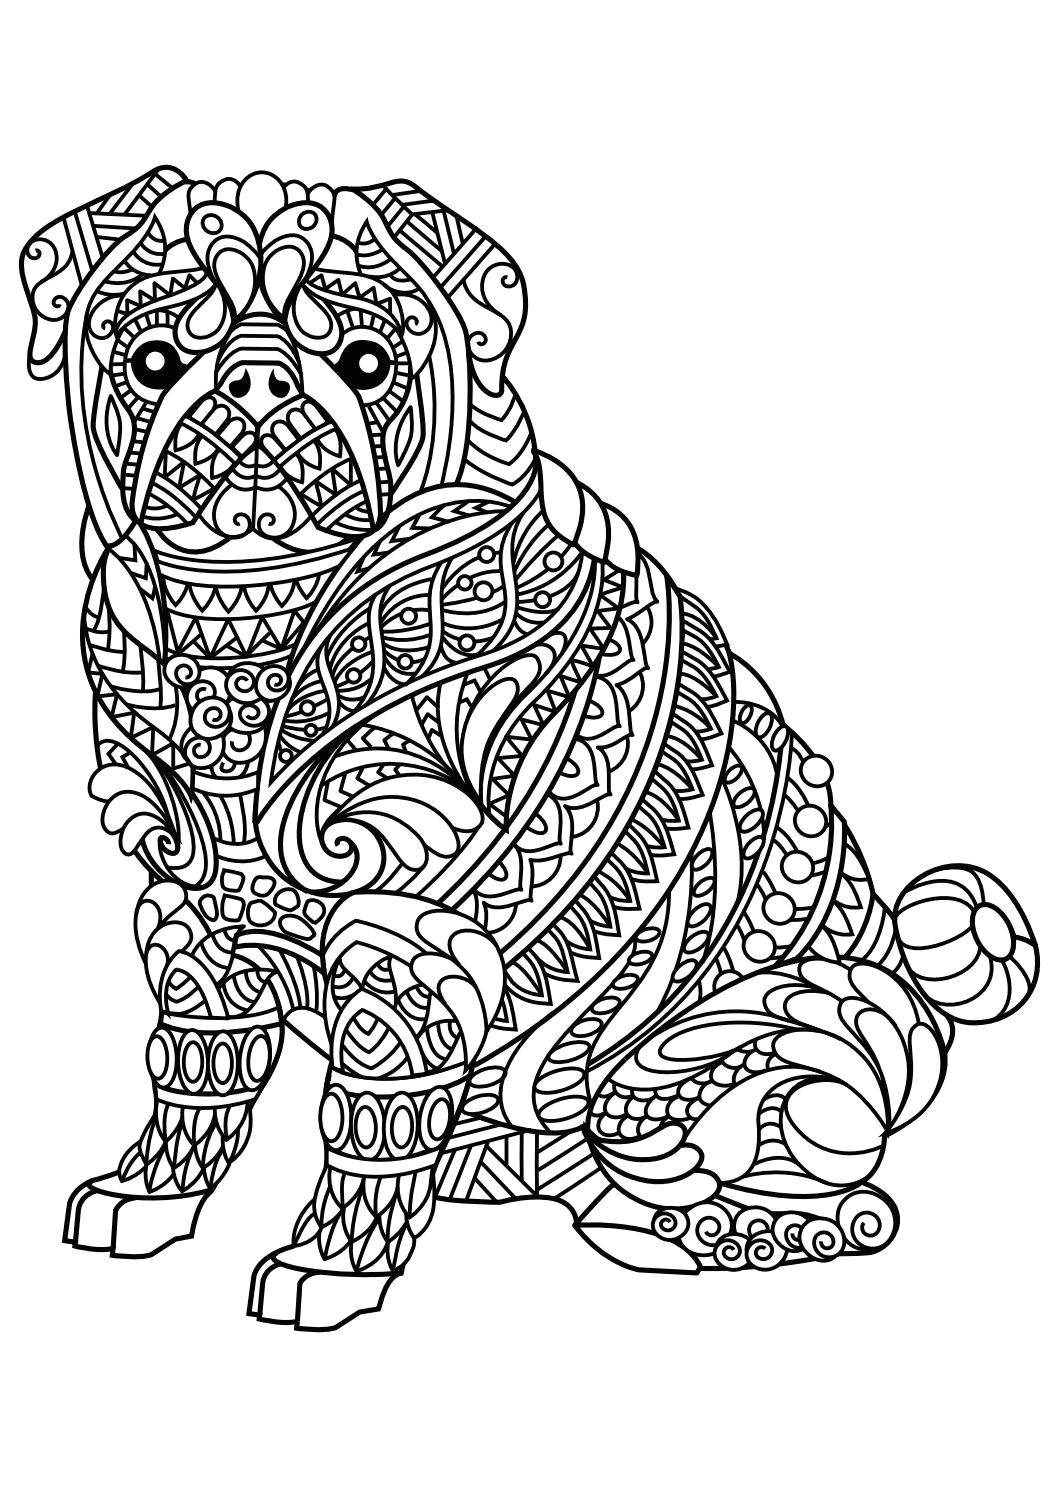 Drawing Dogs Pdf Animal Coloring Pages Pdf Coloring Animals Pinterest